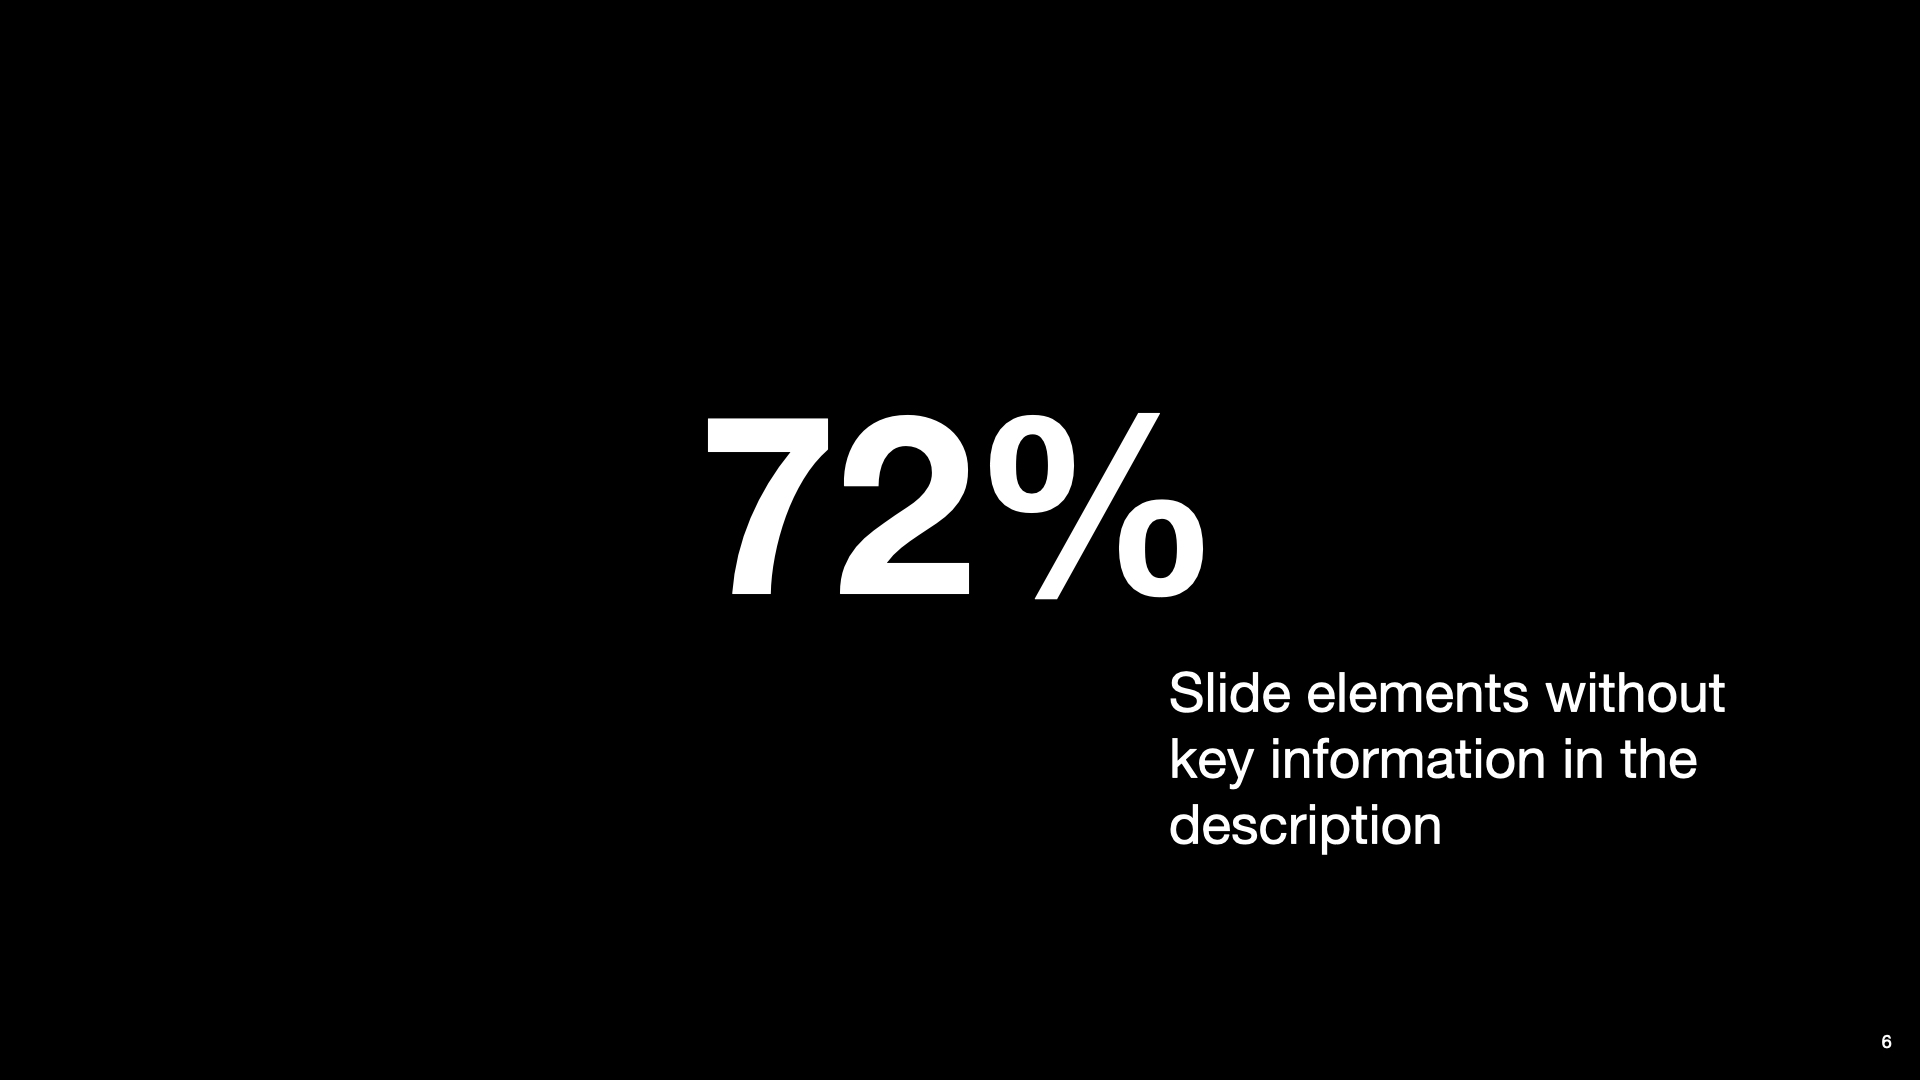 A slide highlights the portion of undescribed contents in usual presentations. Text “72%” placed at the center of the slides with huge font size and bold typeface. At the bottom right side of that text is text “Slide elements without key information in the description” with normal font size.